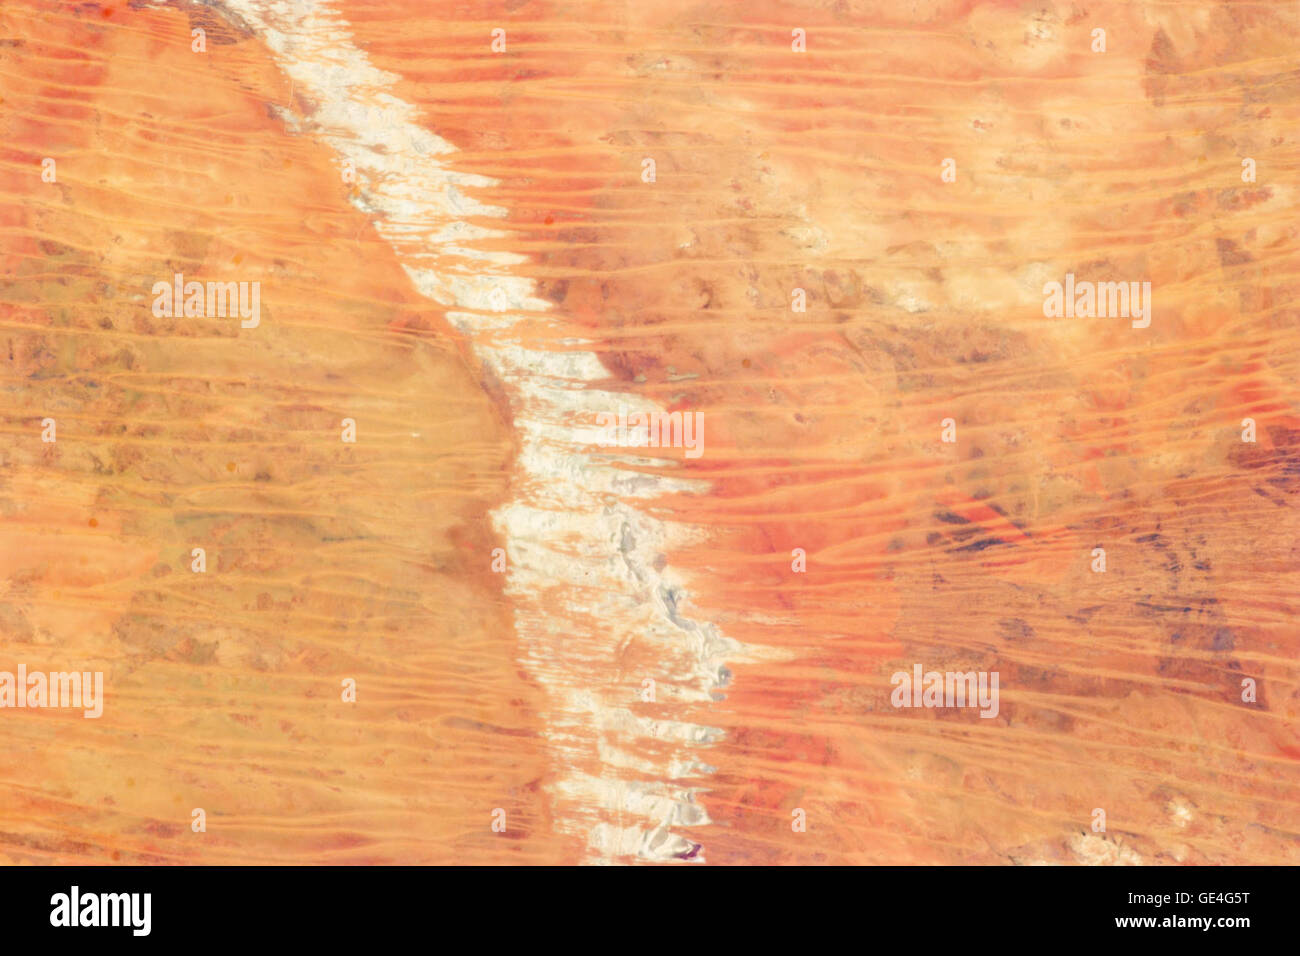 Description In northwest Australia, the Great Sandy Desert holds great geological interest as a zone of active sand dune movement. While a variety of dune forms appear across the region, this astronaut photograph features numerous linear dunes (about 25 meters high) separated in a roughly regular fashion (0.5 to 1.5 kilometers apart). The dunes are aligned to the prevailing winds that generated them, which typically blow from east to west. Where linear dunes converge, dune confluences point downwind. When you fly over such dune fields—either in an airplane or the International Space Station—th Stock Photo